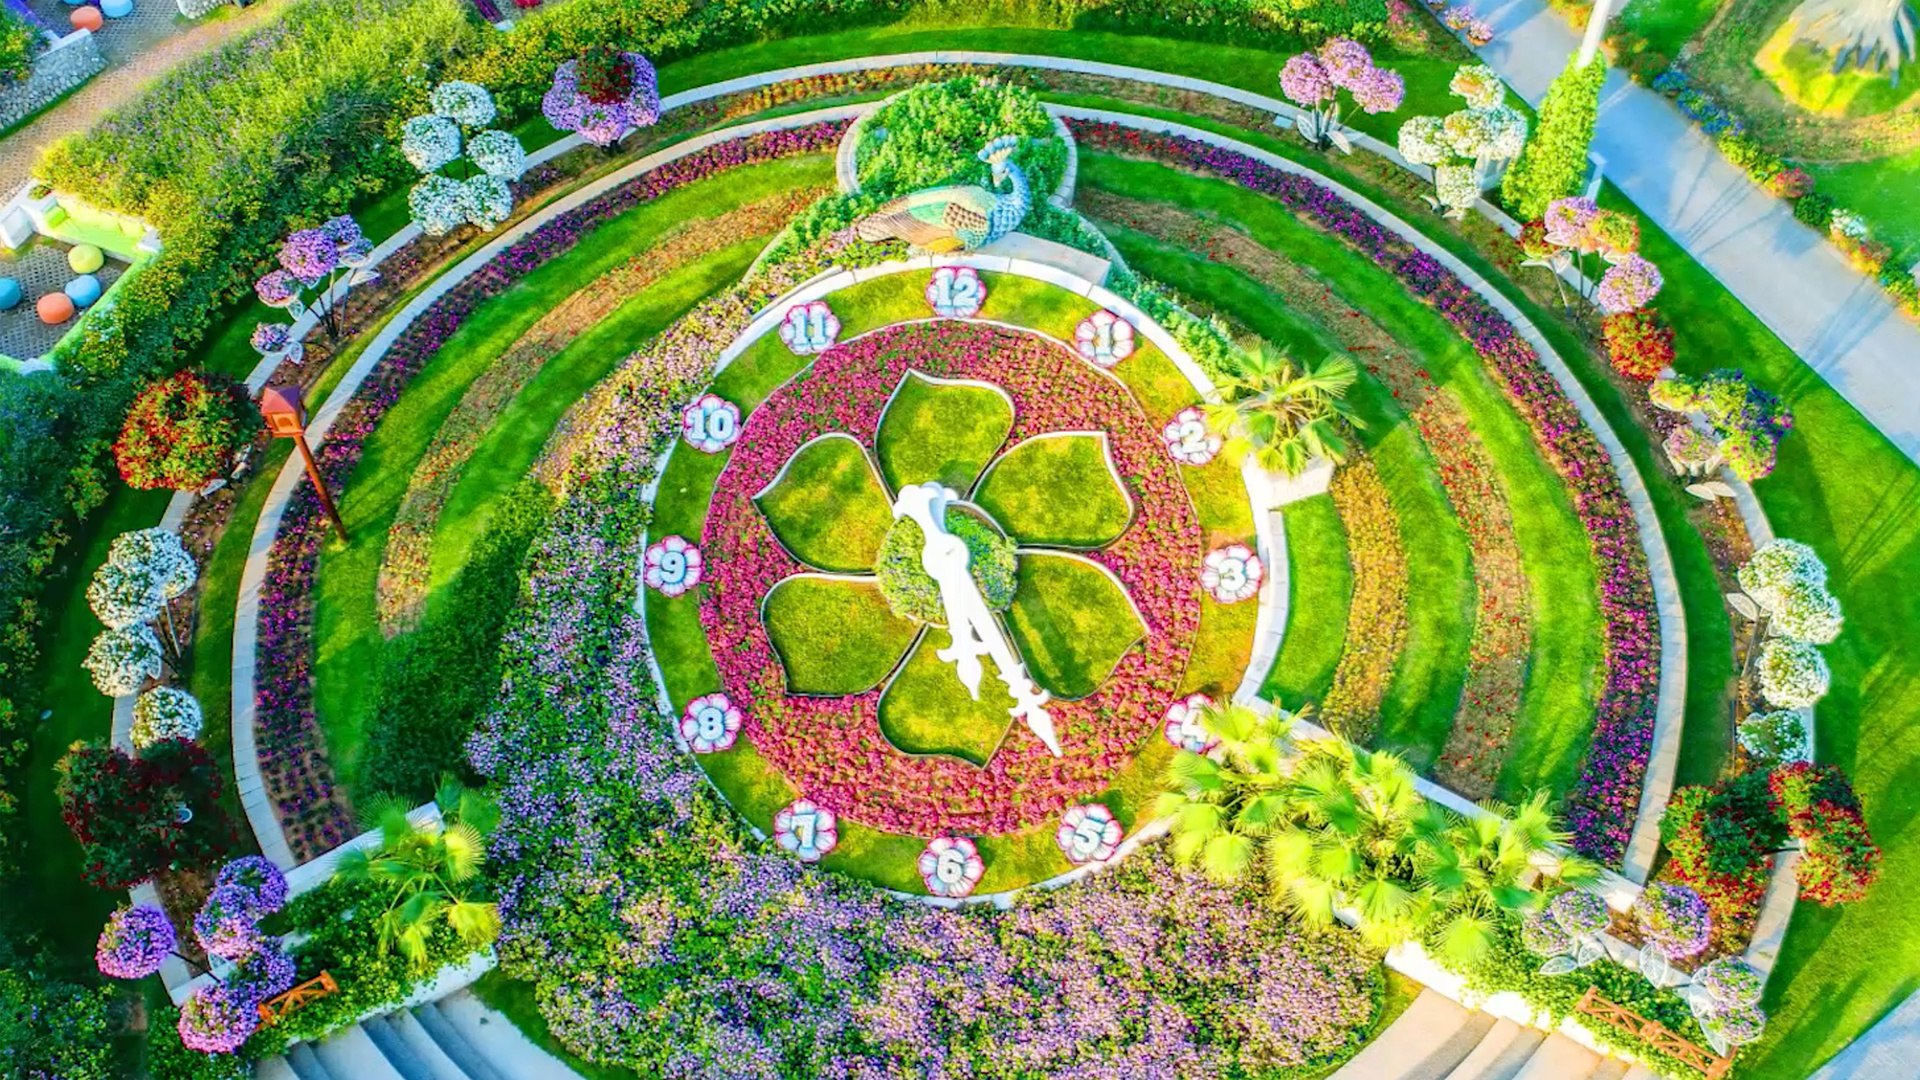 The World’s Biggest Flower Garden Sits in the Middle of a Desert